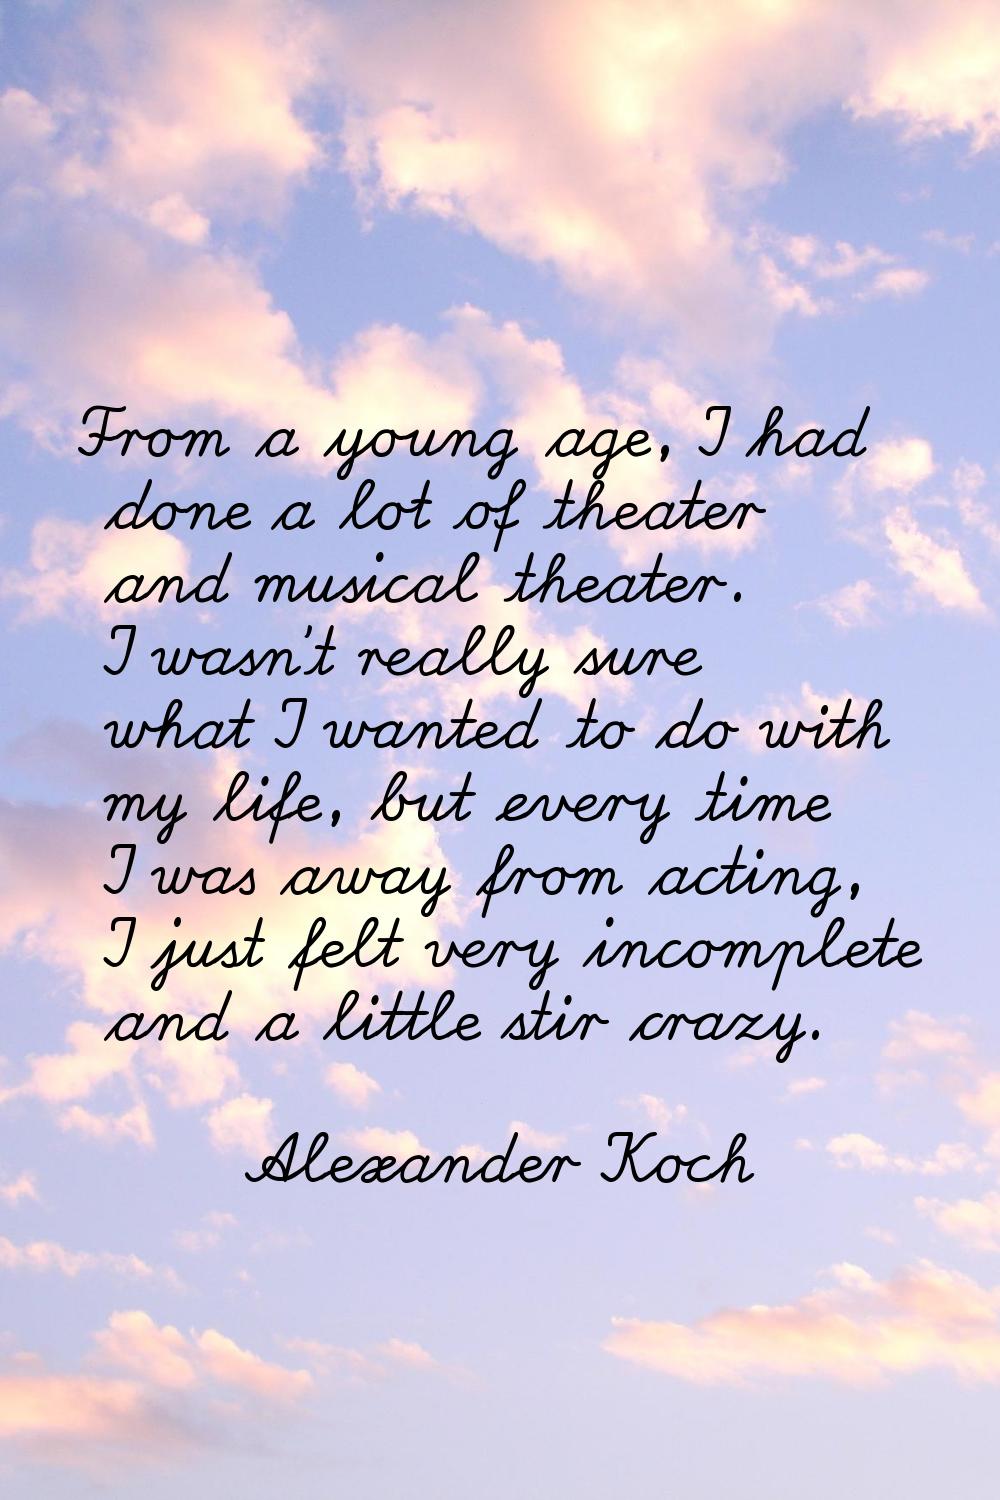 From a young age, I had done a lot of theater and musical theater. I wasn't really sure what I want